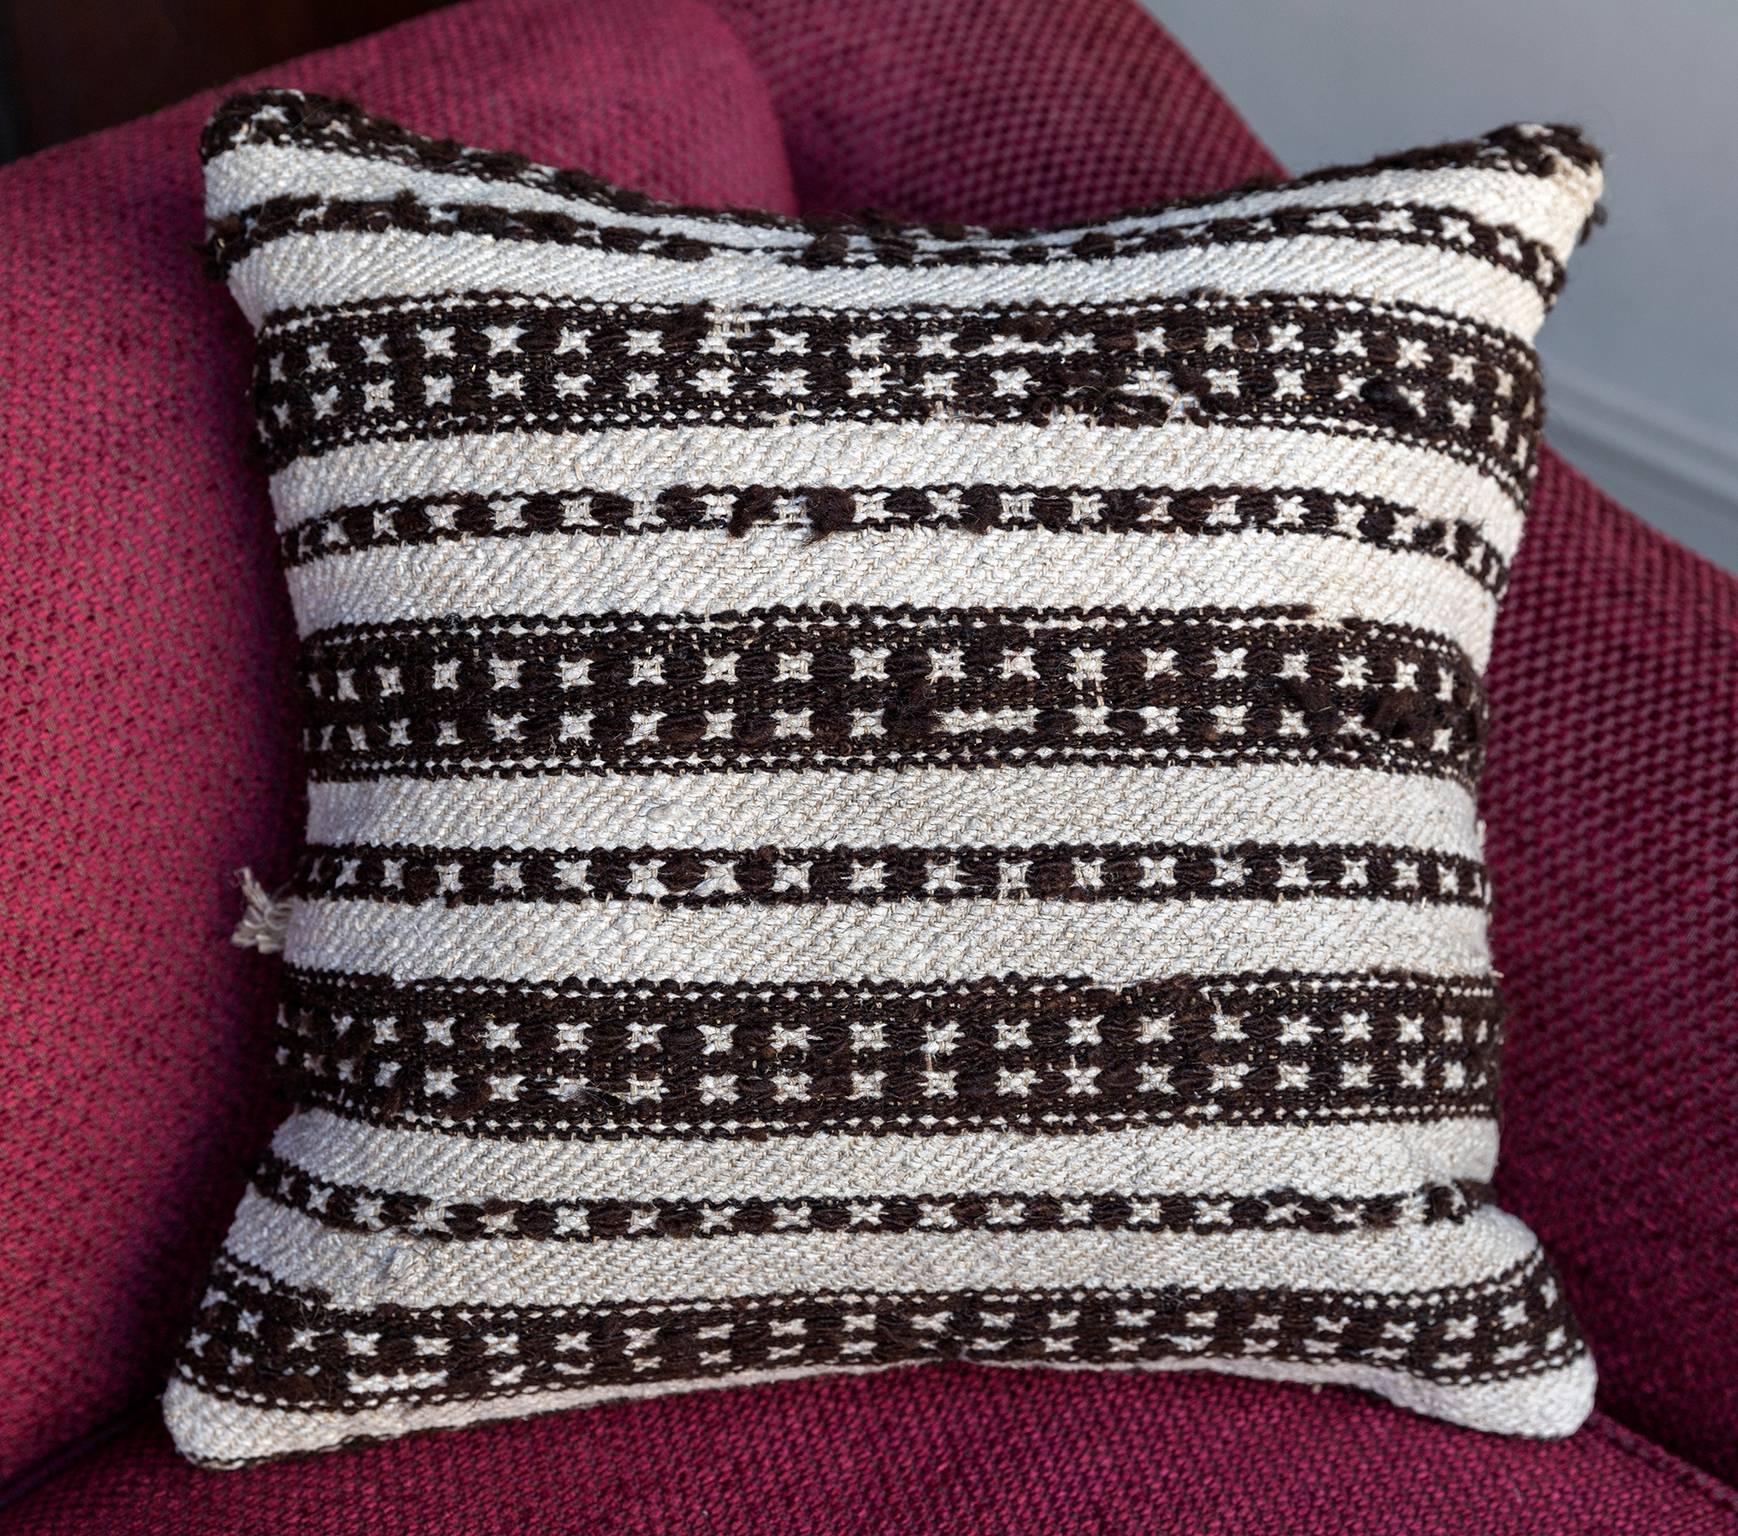 A handmade cushion covered with an antique Turkish rug with trim detailing, backed with a handwoven wool and hemp vintage fabric with a decorative stripe and a hand-embroidered HOWE logo.